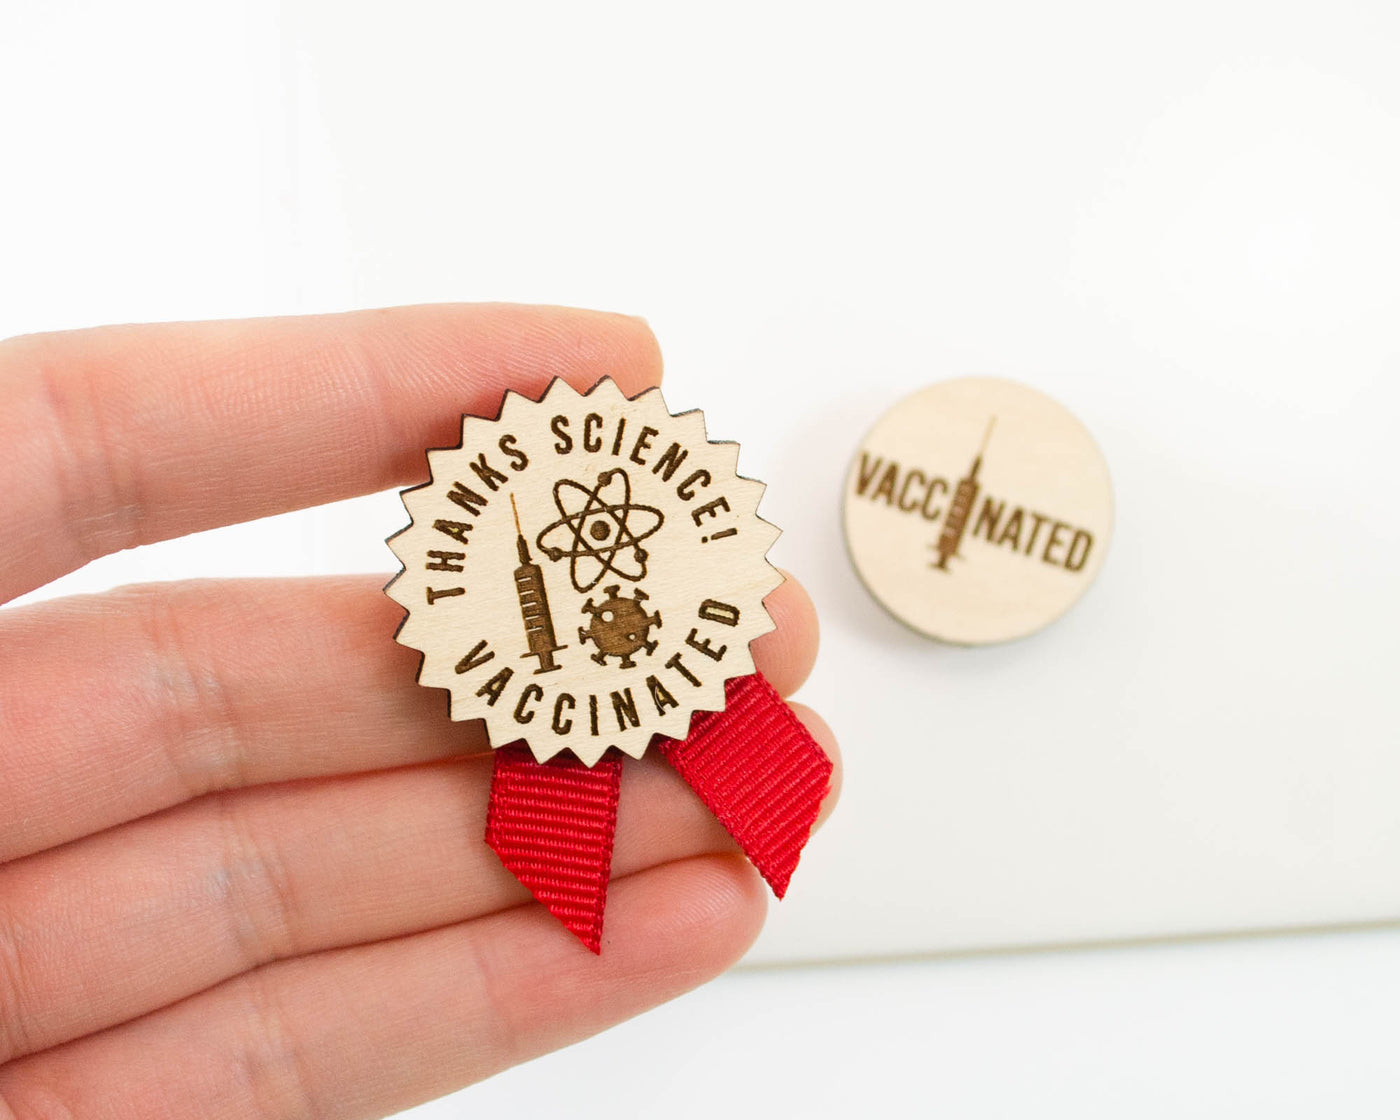 vaccination vaccine pin that says thanks science made from wood